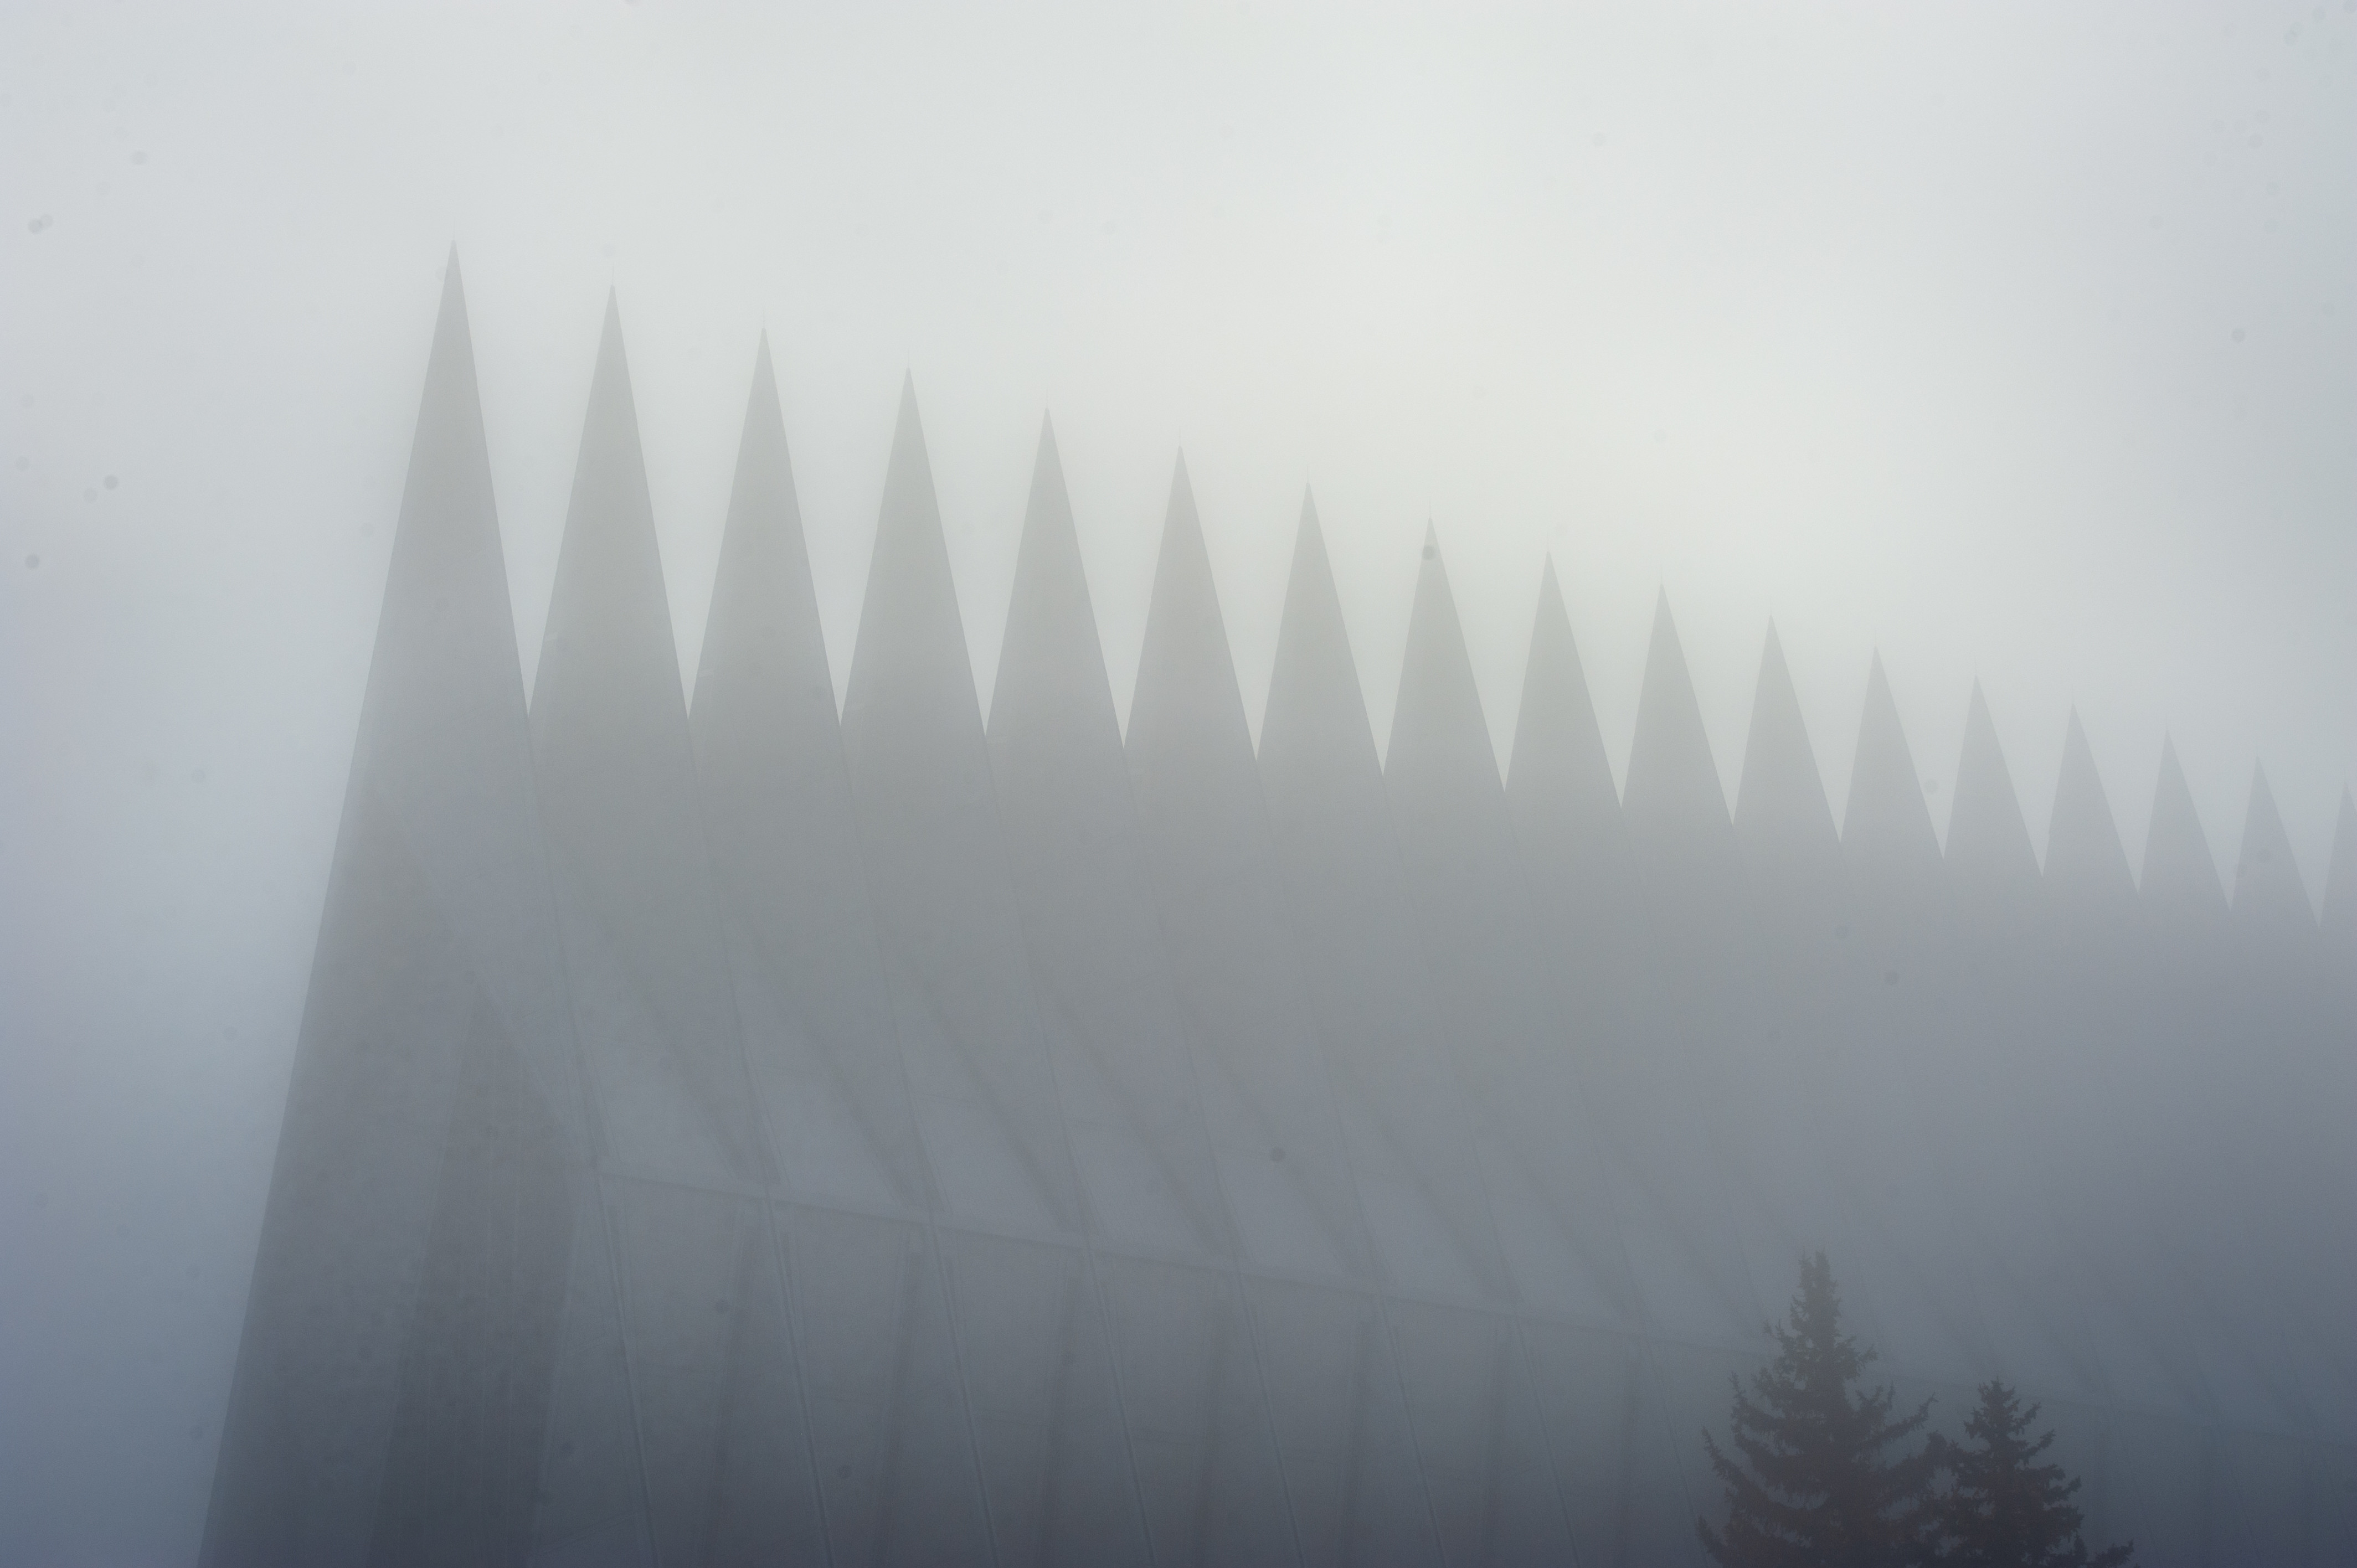 The Cadet Chapel peeks through the fog on a cold November day at the U.S. Air Force Academy. (U.S. Air Force photo by Tech. Sgt. Benjamin W. Stratton)